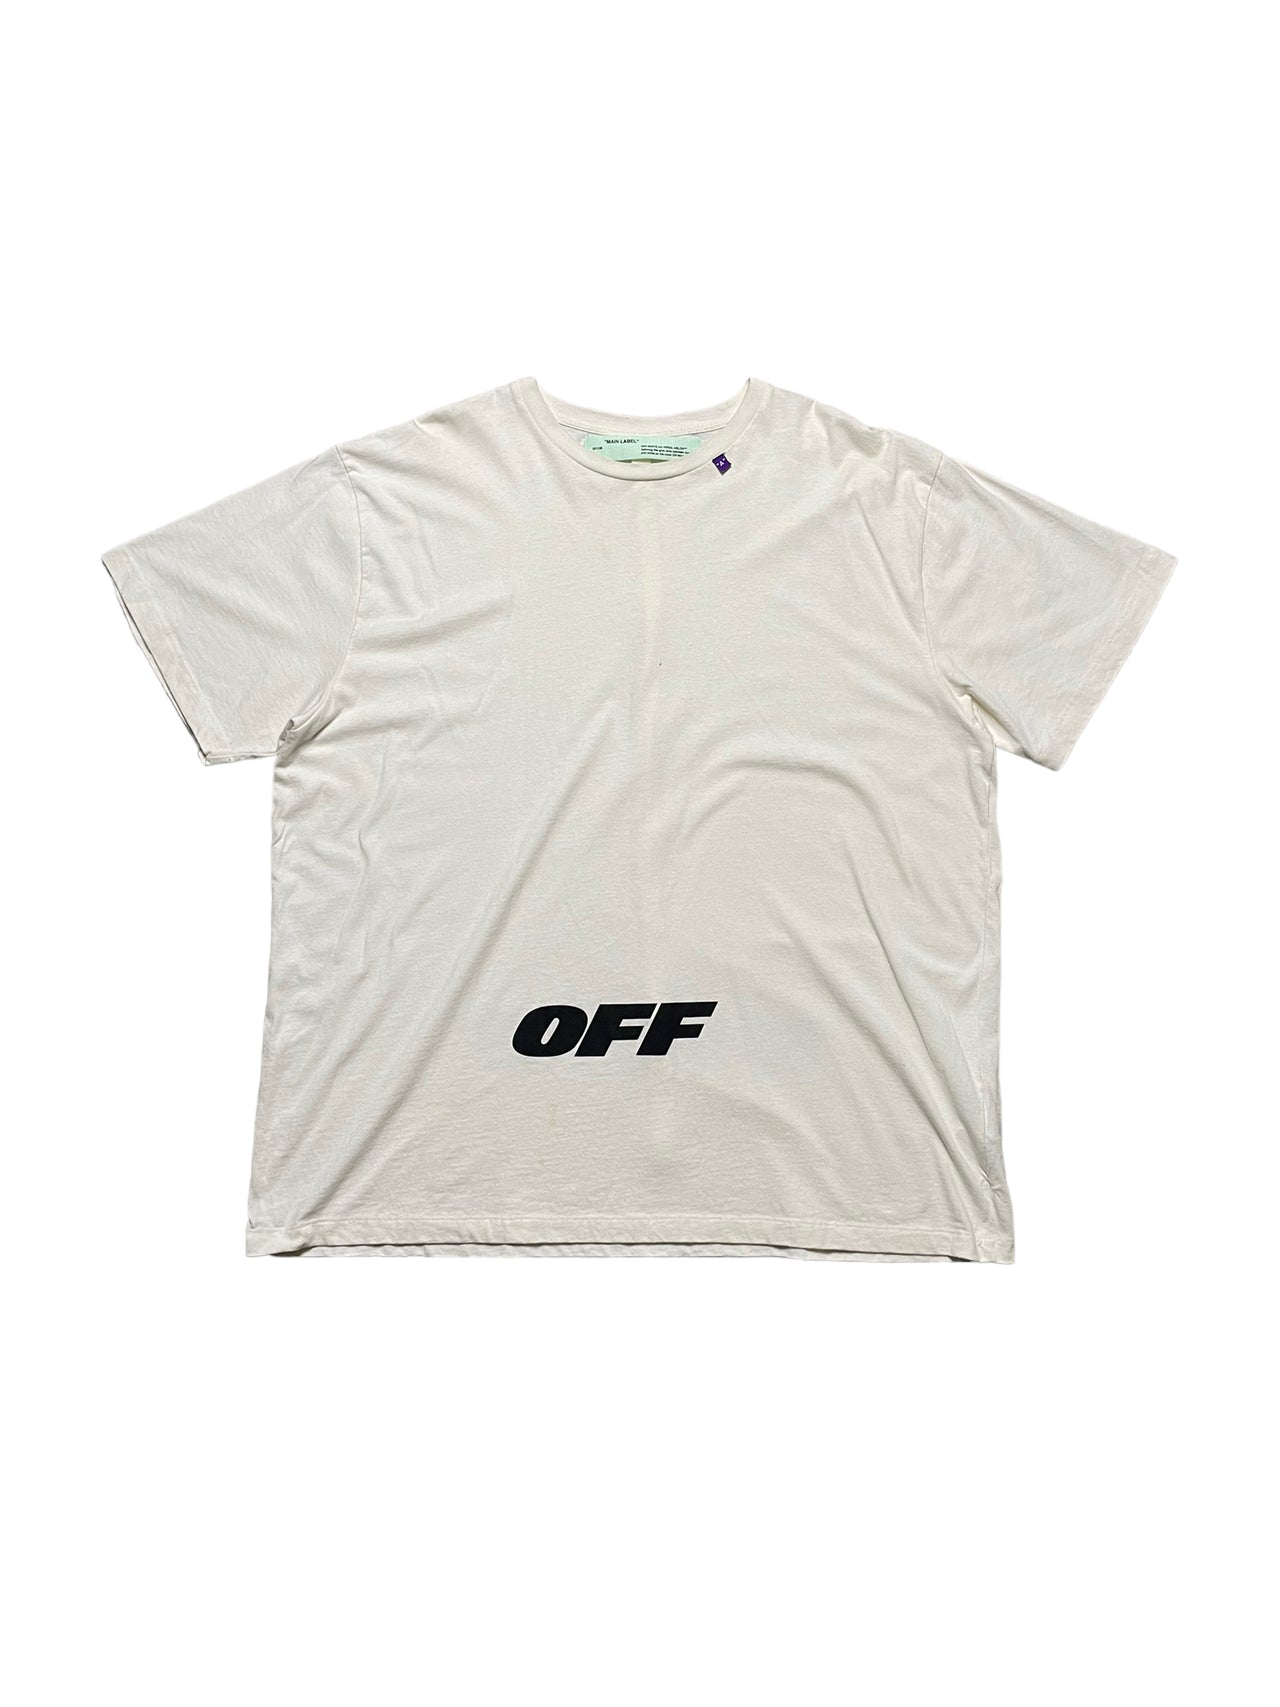 Off White Spellout T-Shirt